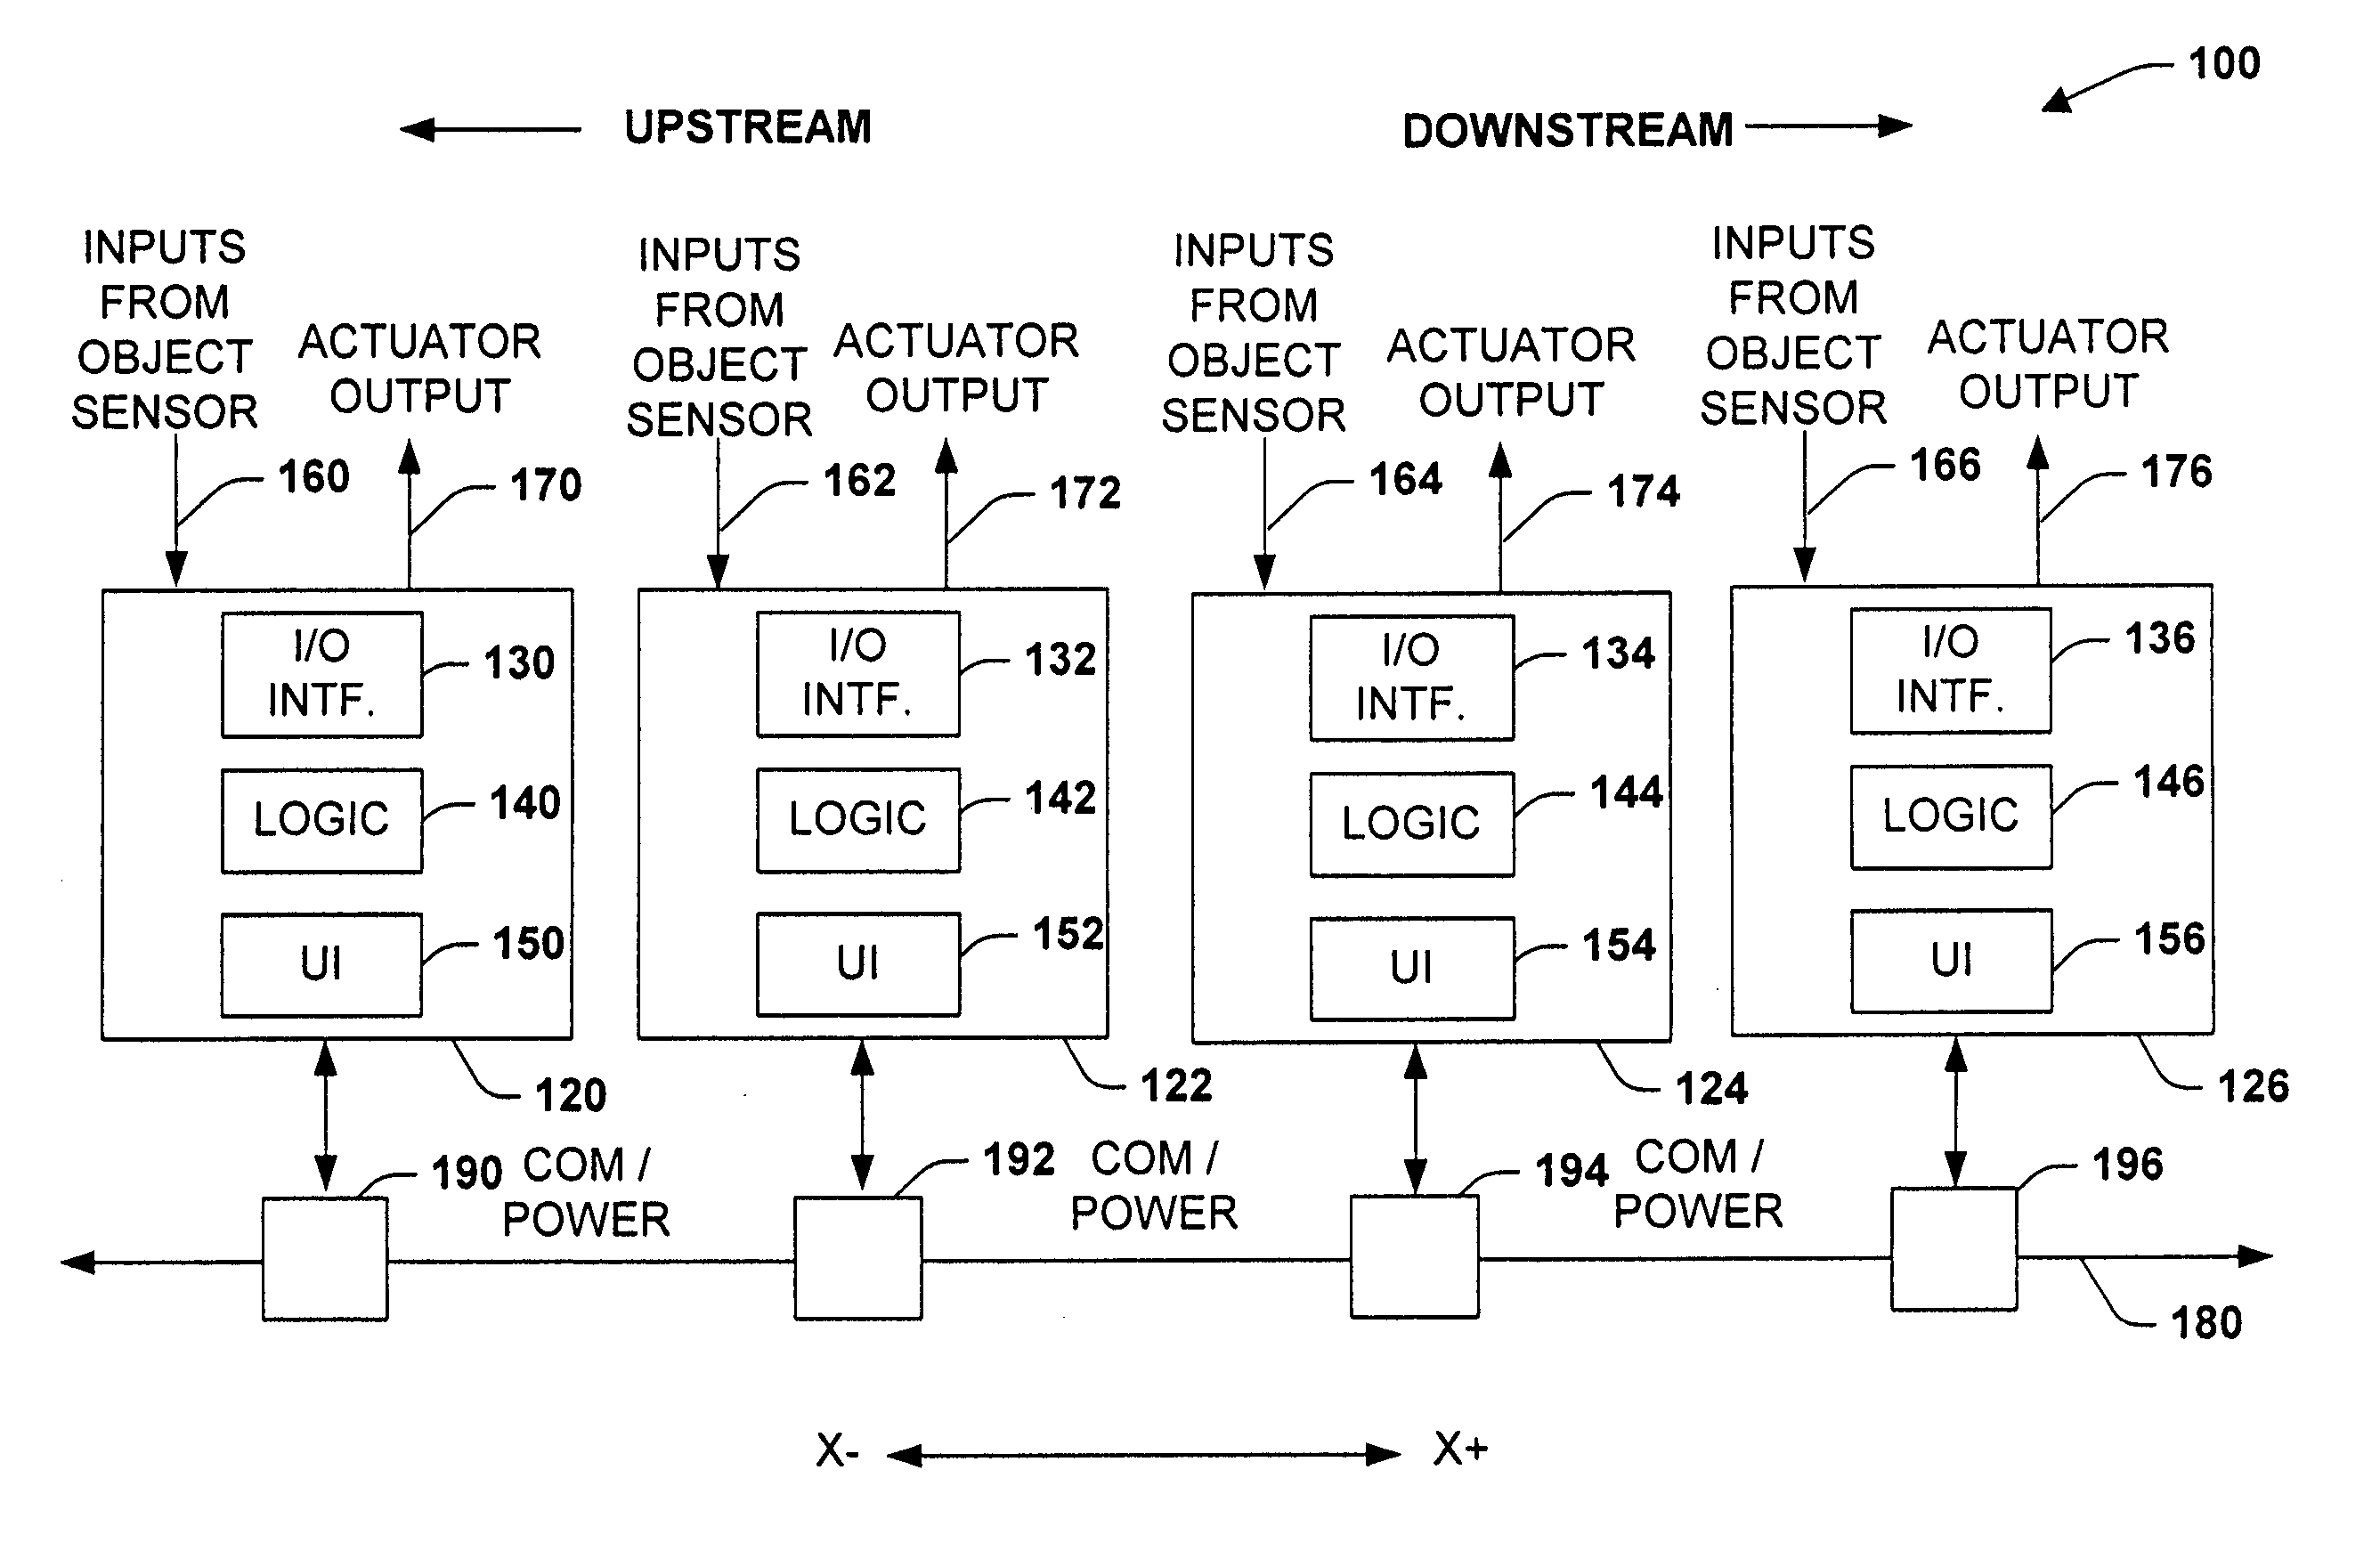 System and methodology providing coordinated and modular conveyor zone control